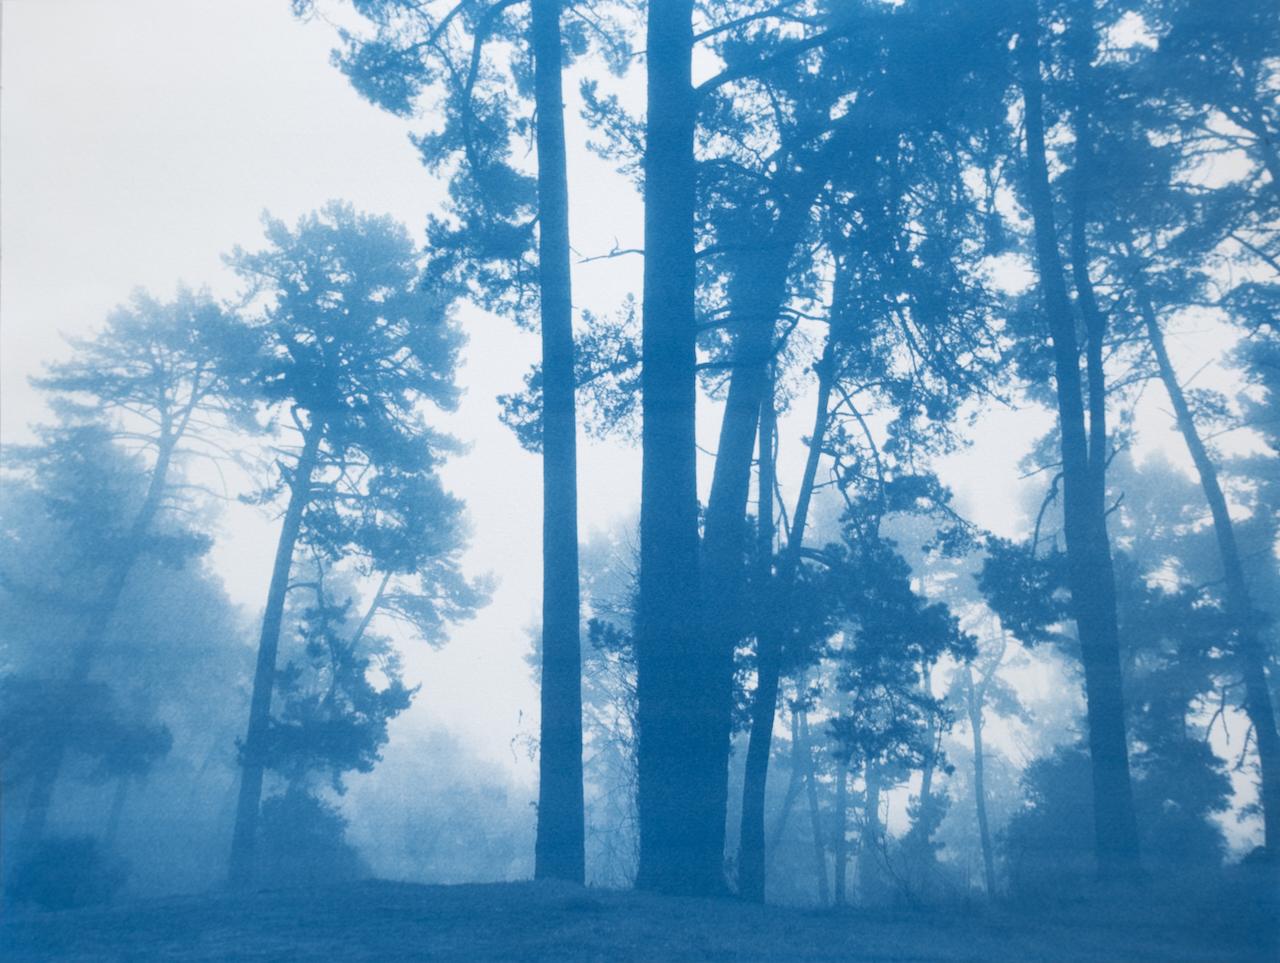 Christine So Landscape Print - Morning Valley Light (Hand-printed cyanotype, 18 x 24 inches)